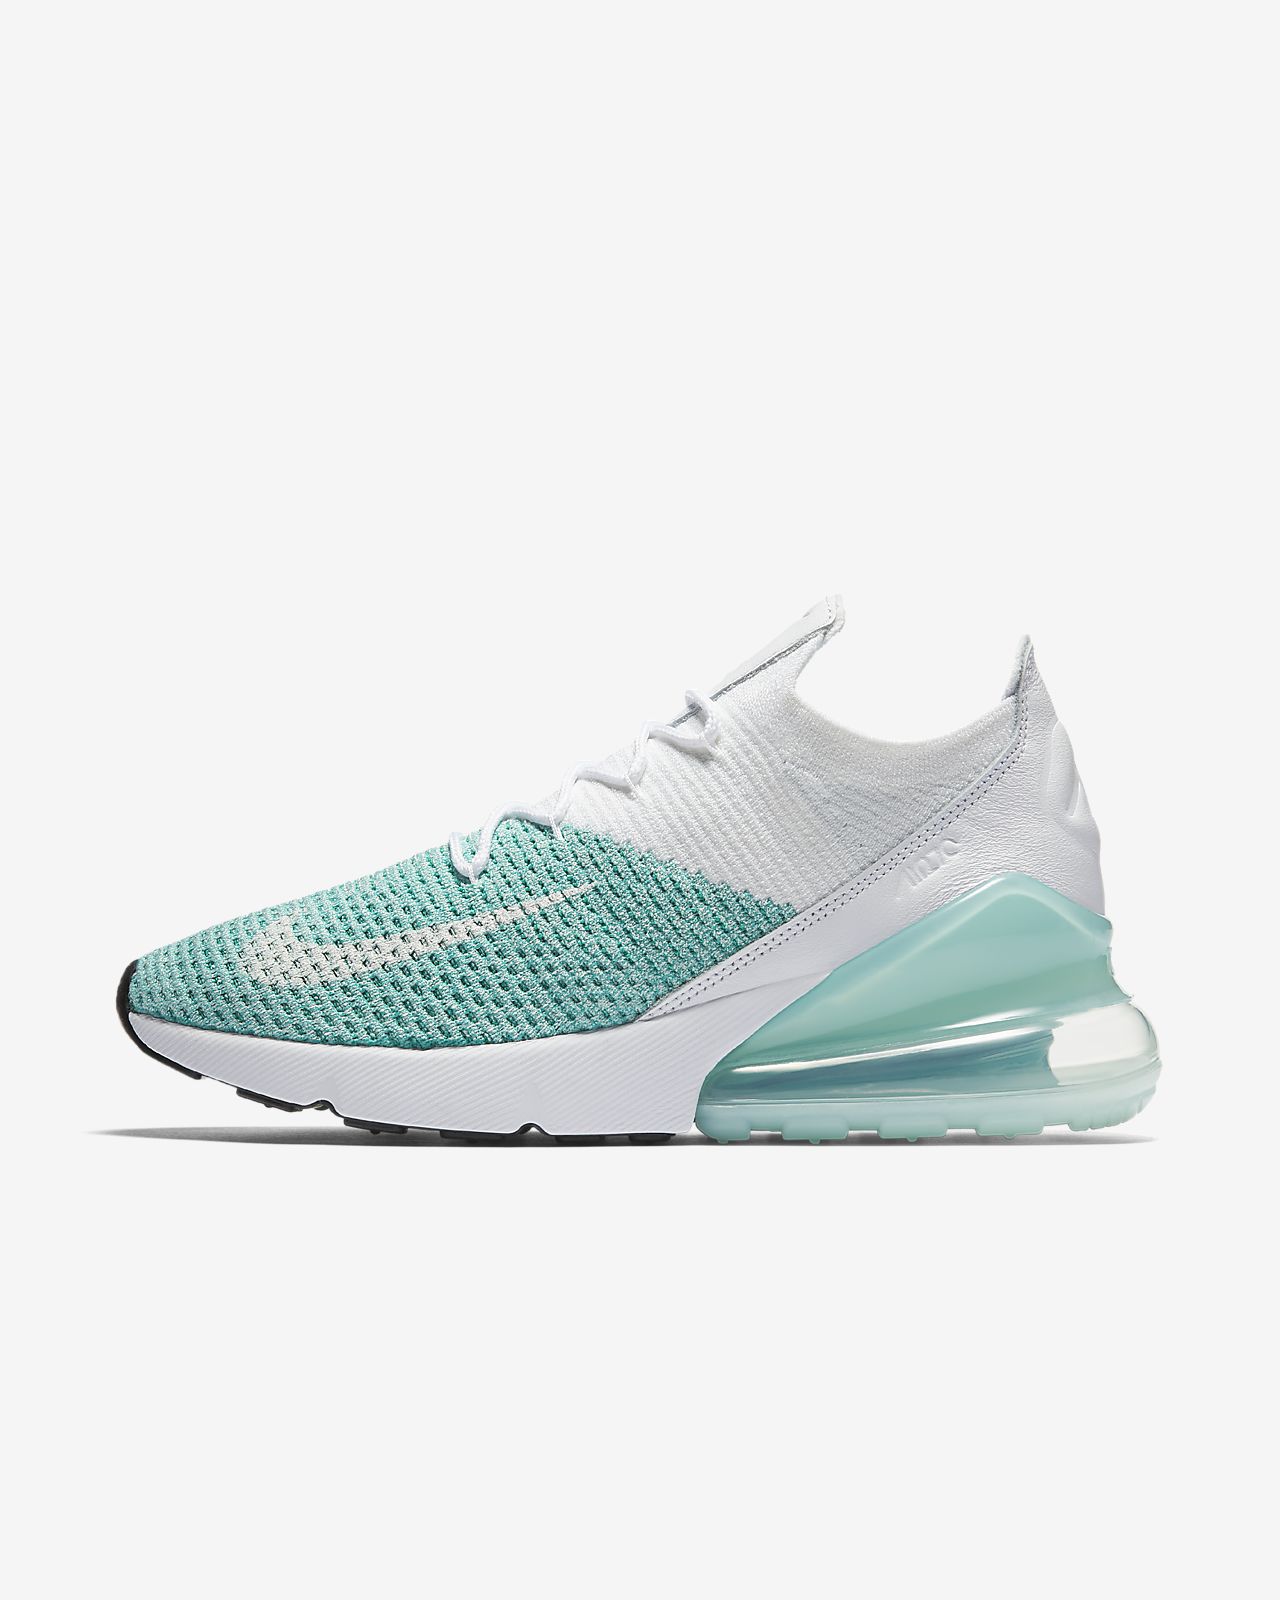 Chaussure Nike Air Max 270 Flyknit pour Femme